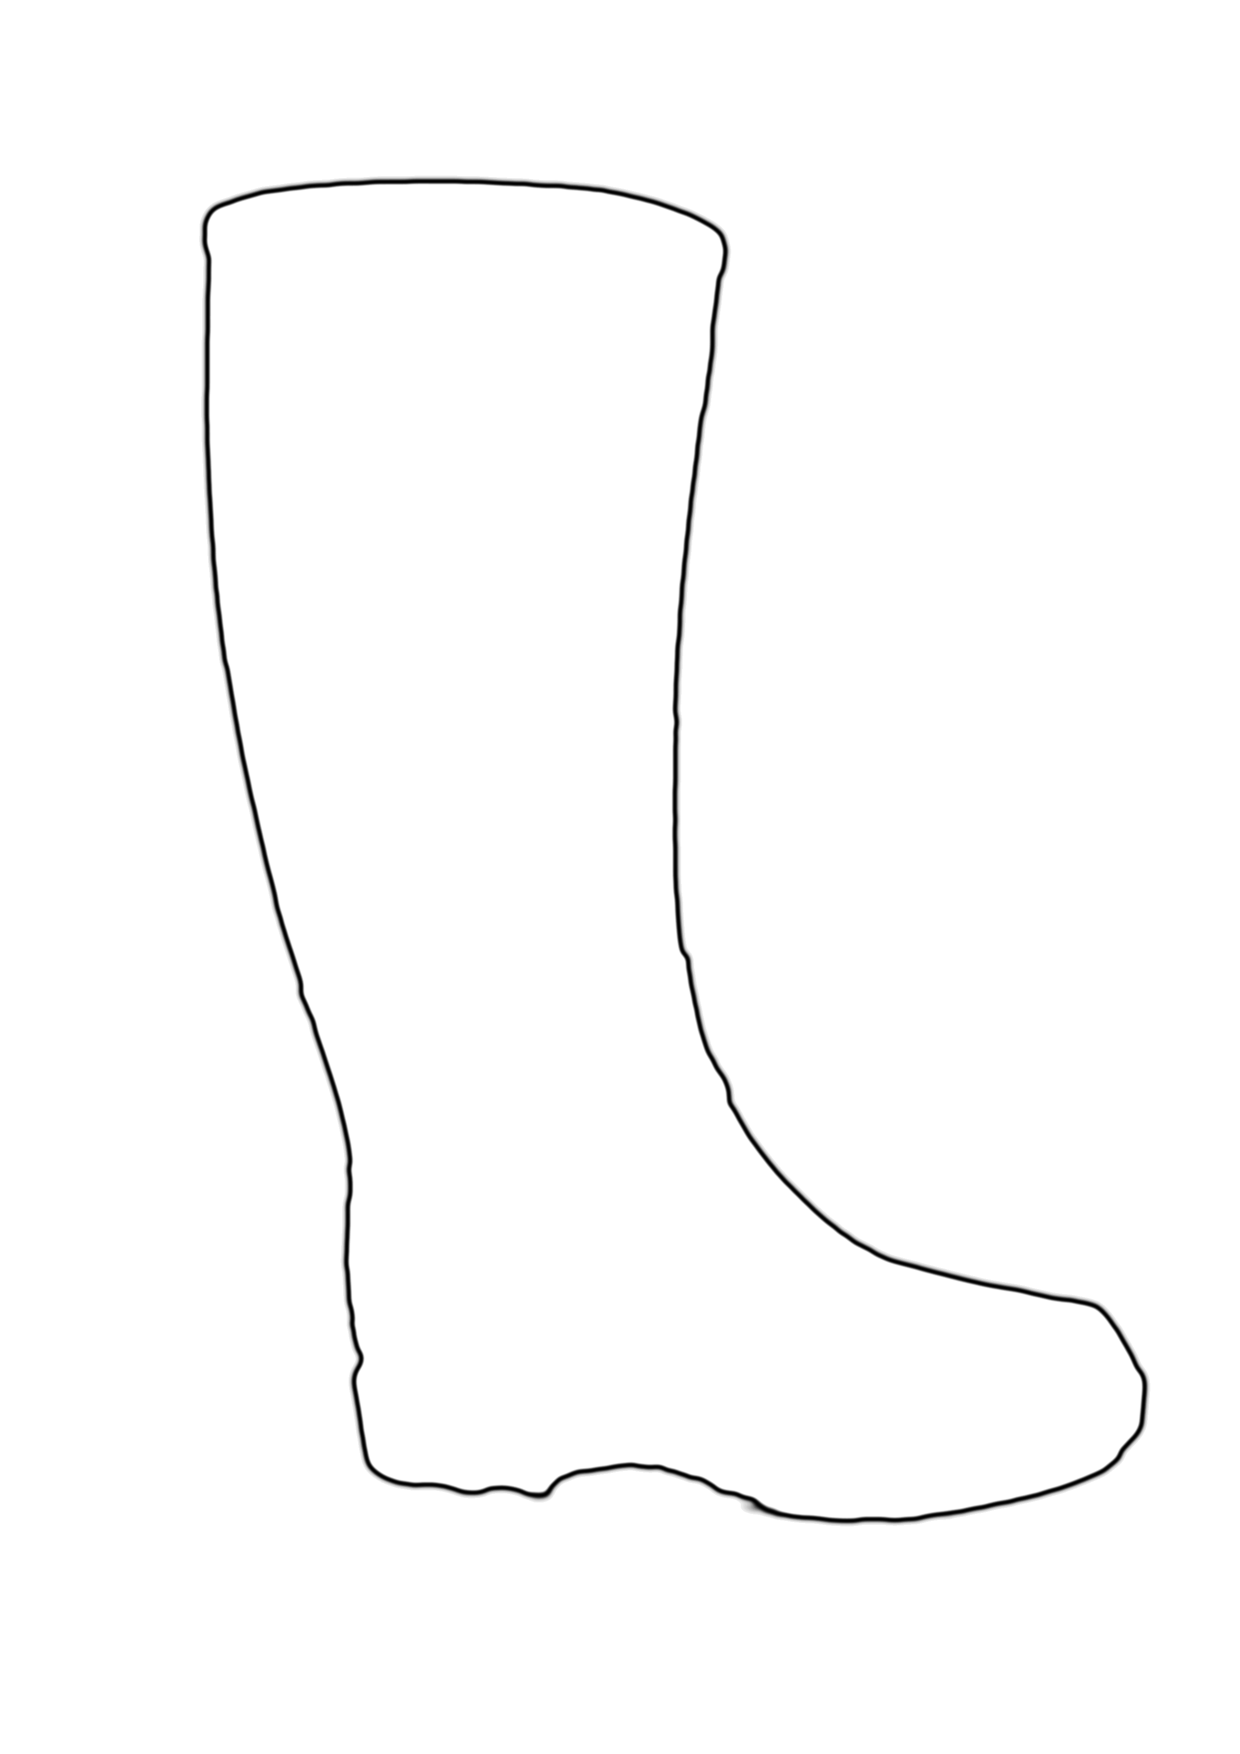 Rain Boots Coloring Page | Clipart Panda - Free Clipart Images